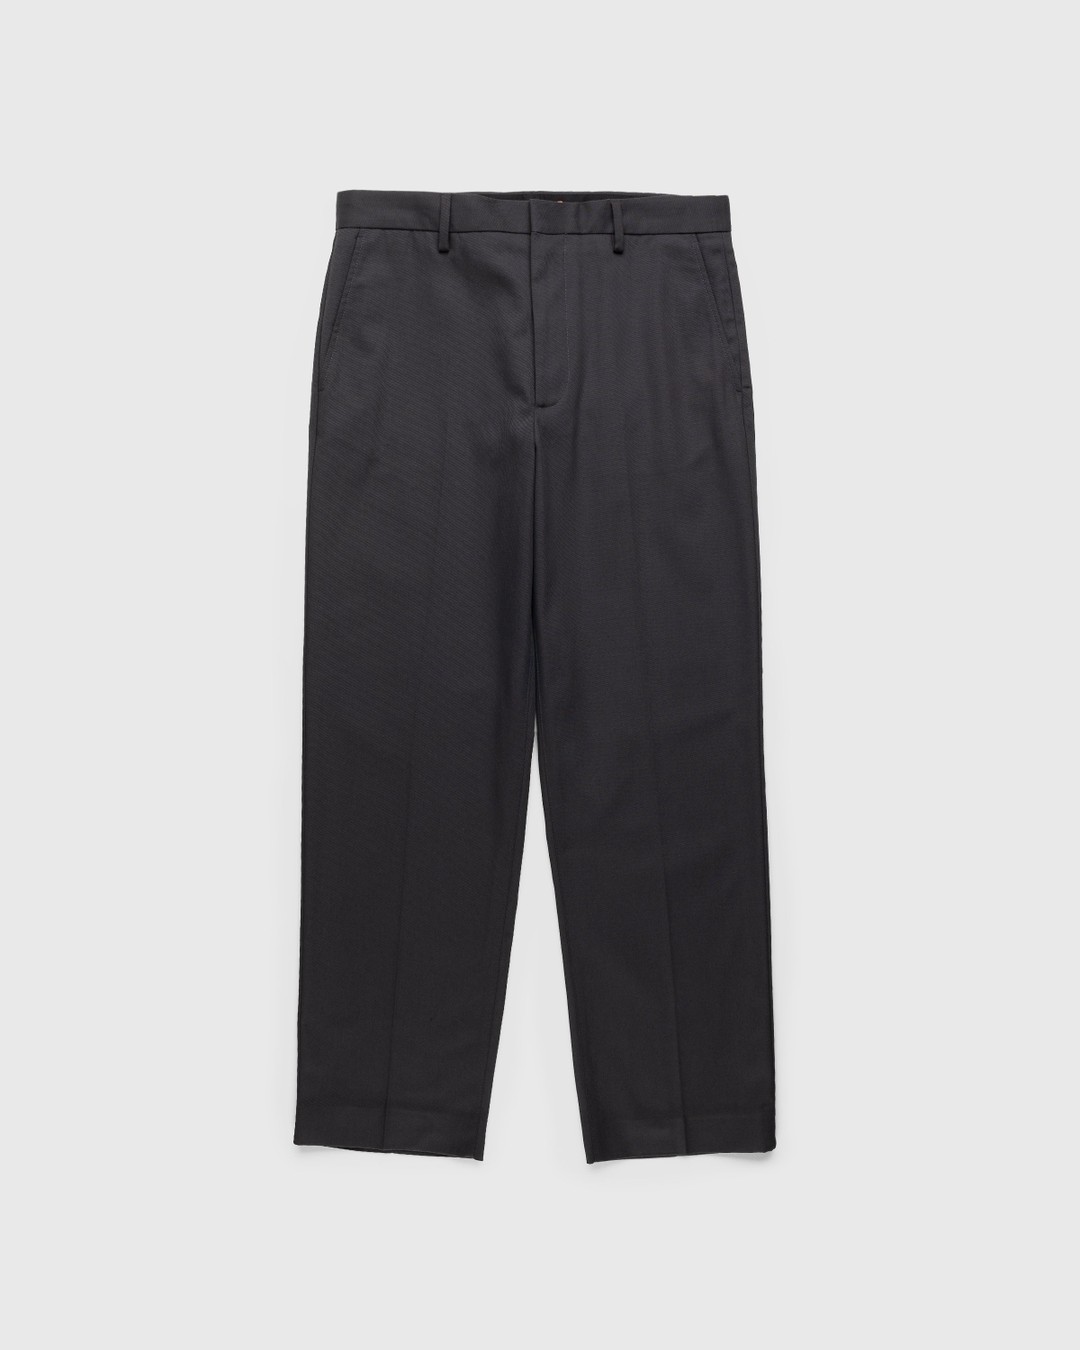 Acne Studios – Casual Trousers Anthracite Grey - Pants - Grey - Image 1